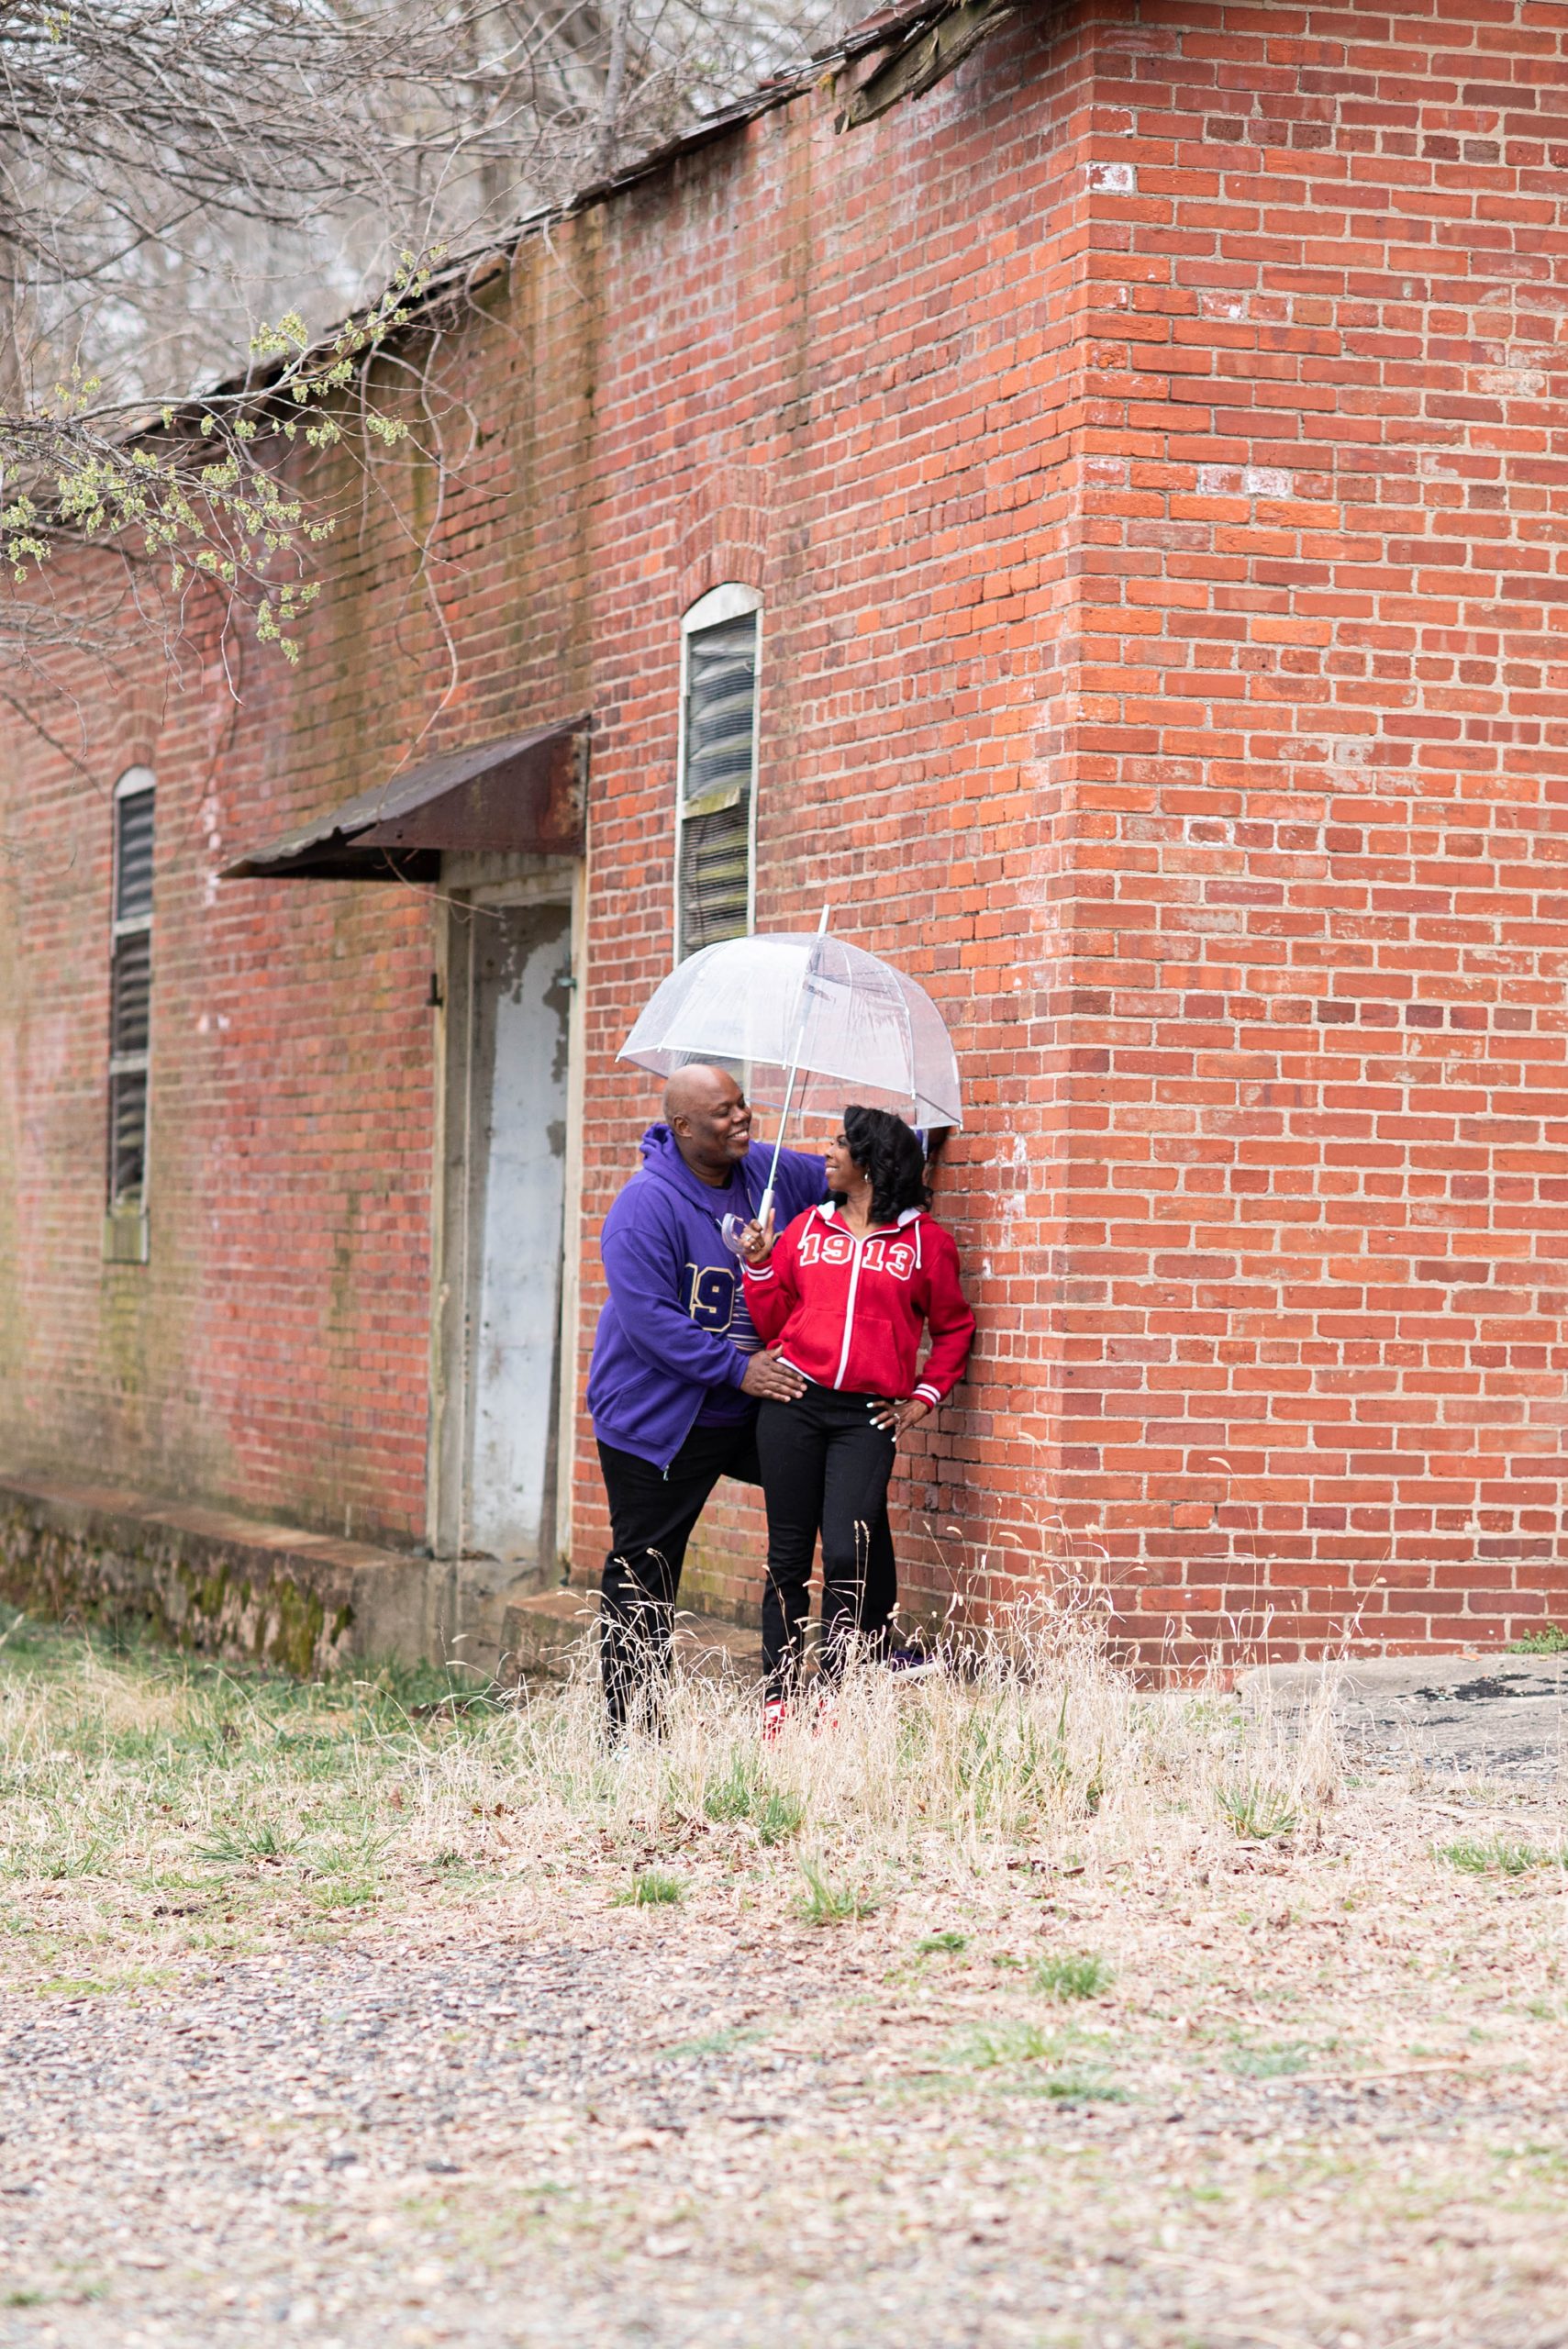 engaged couple poses by brick building under clear umbrella during Maryland engagement photos